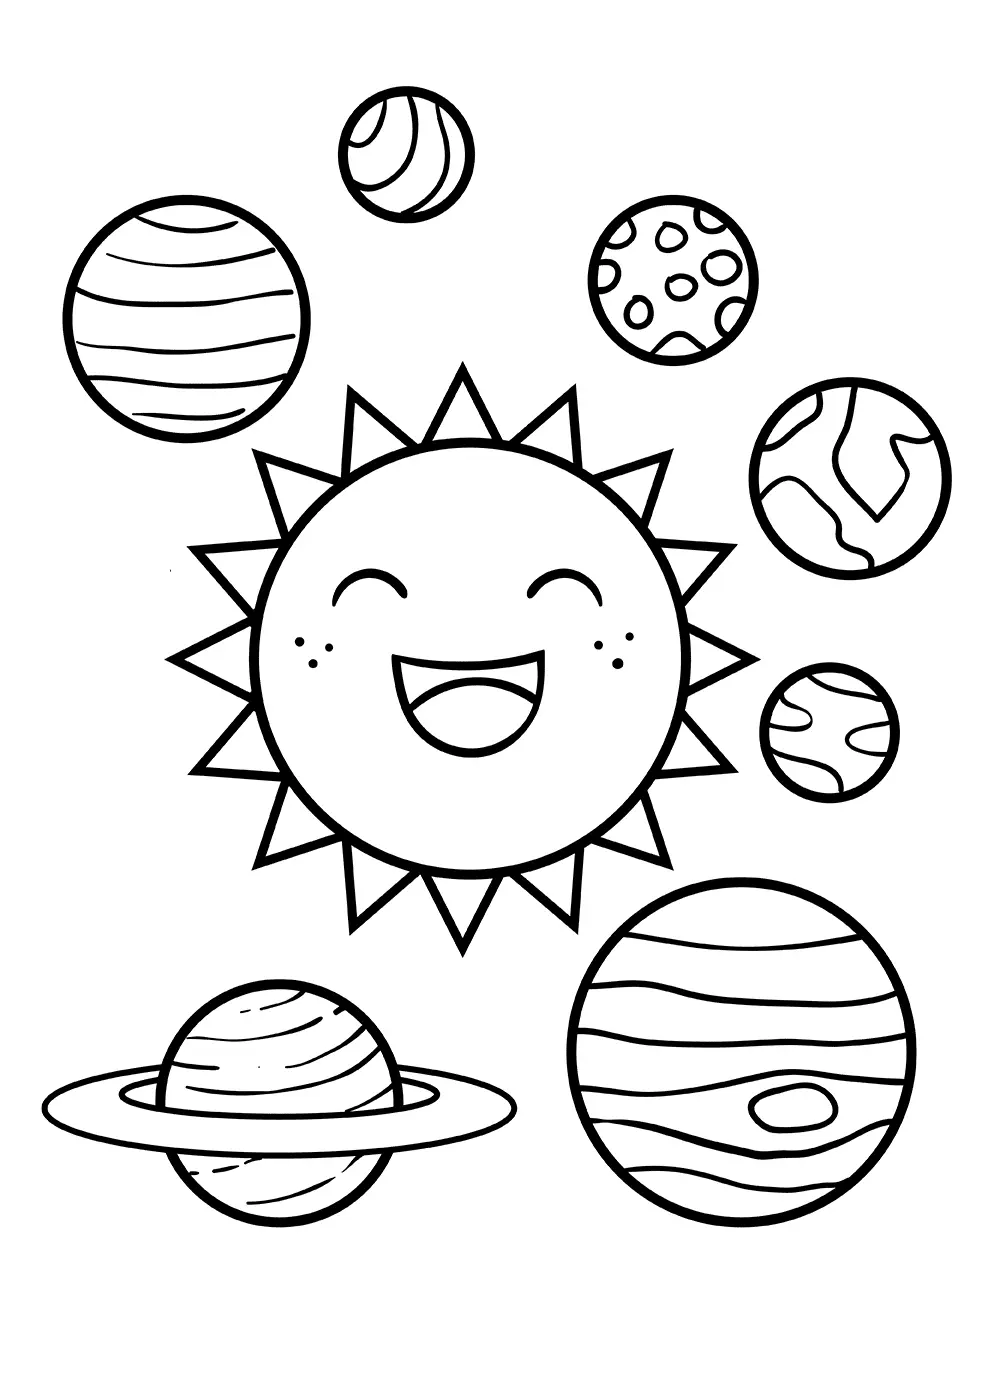 Solar System Coloring Pages